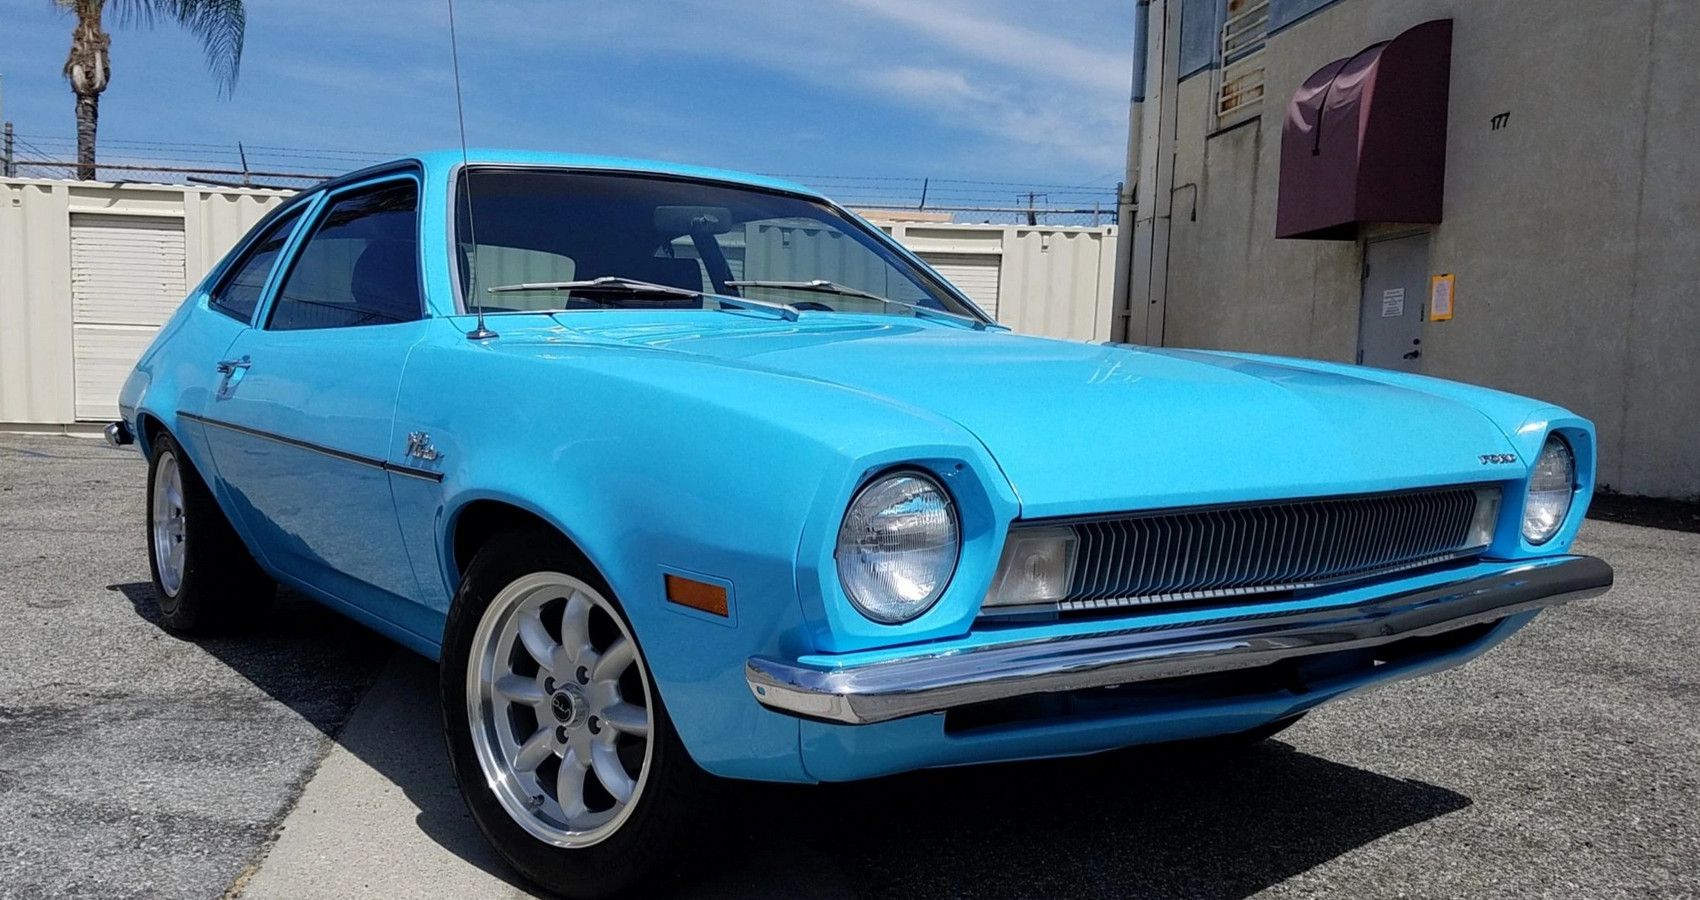 The Horrifying Story Behind The Ford Pinto